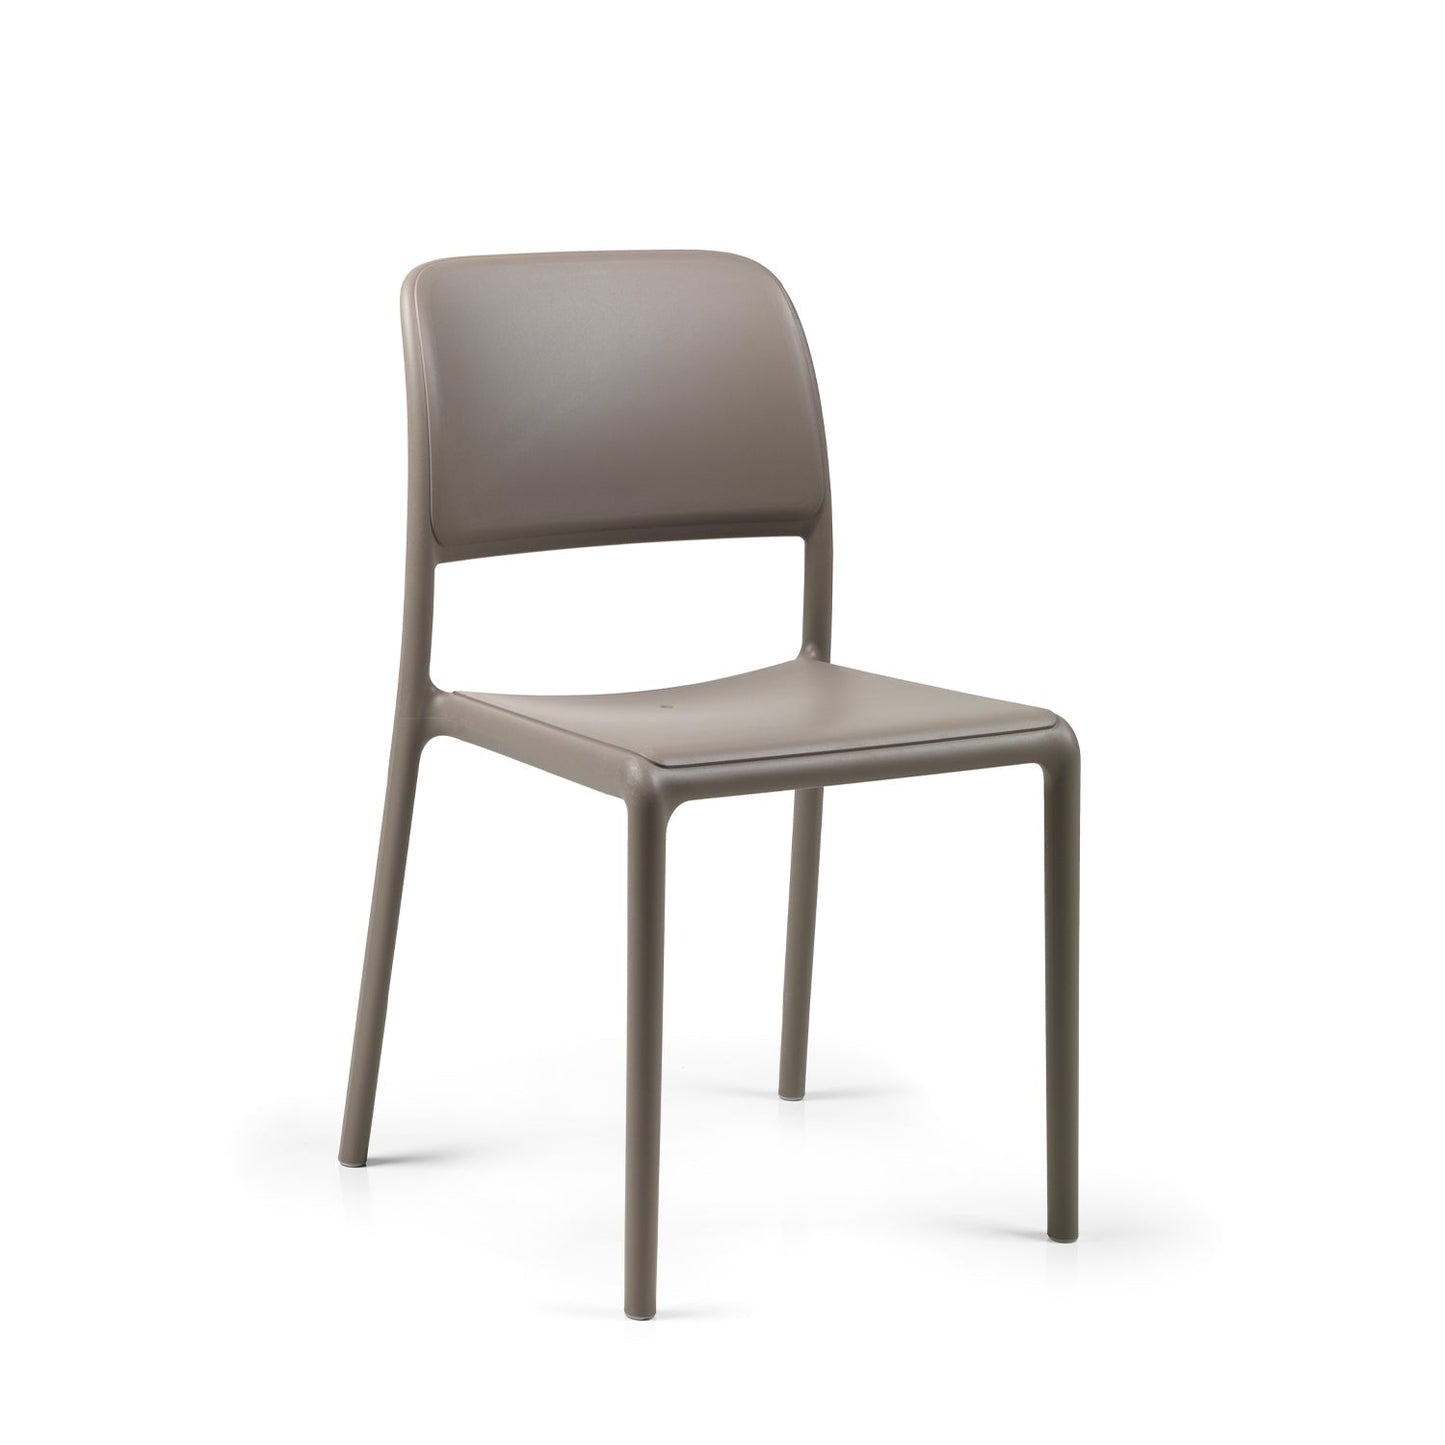 Riva Bistro Garden Chair By Nardi In Taupe